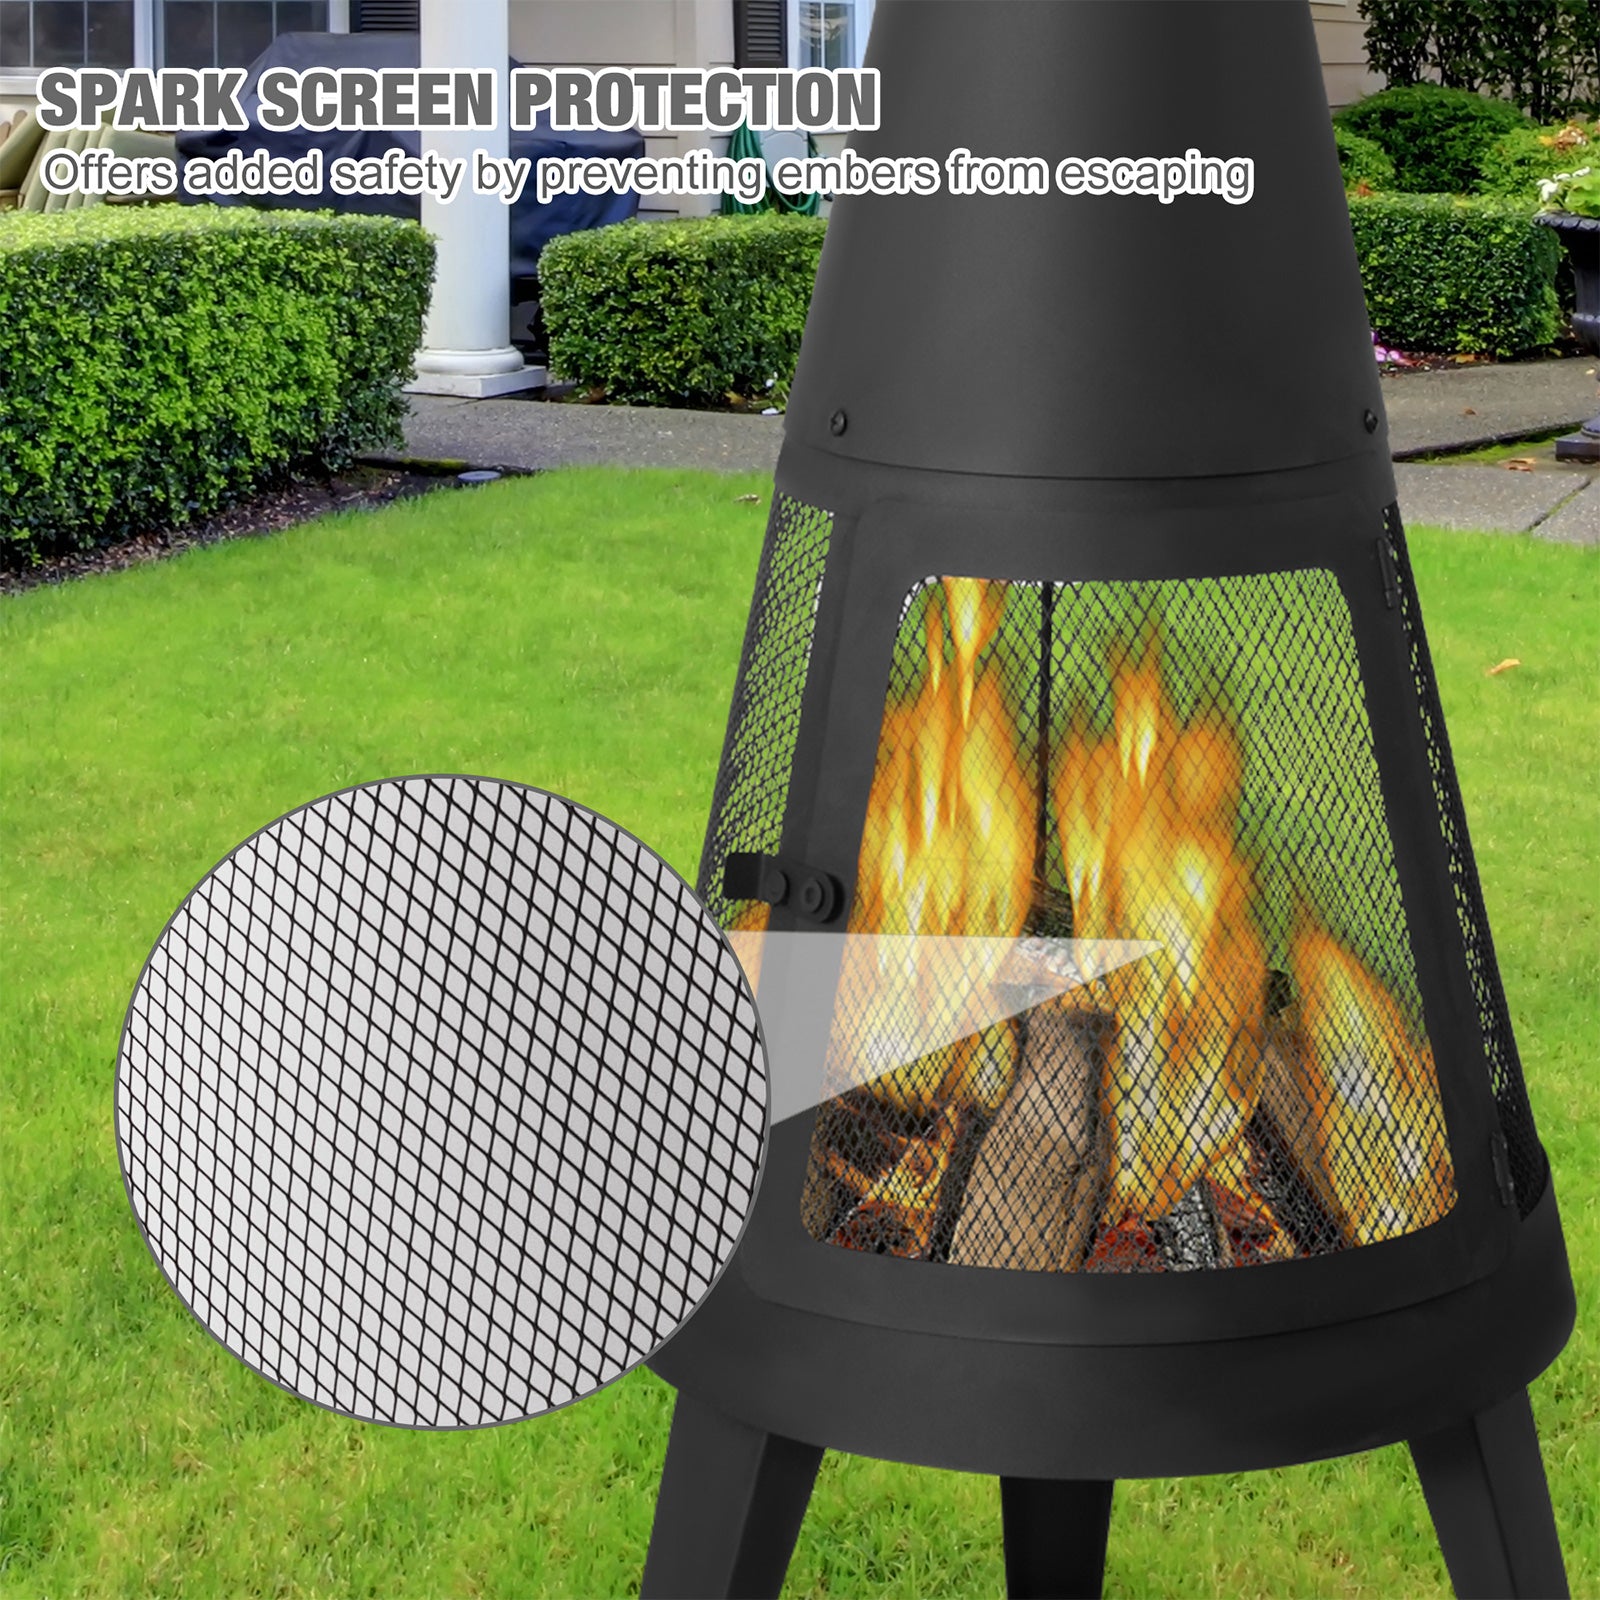 Chiminea Outdoor Fireplace 47.6" Metal Wood Burning Fire Pit with Log Grate, Black